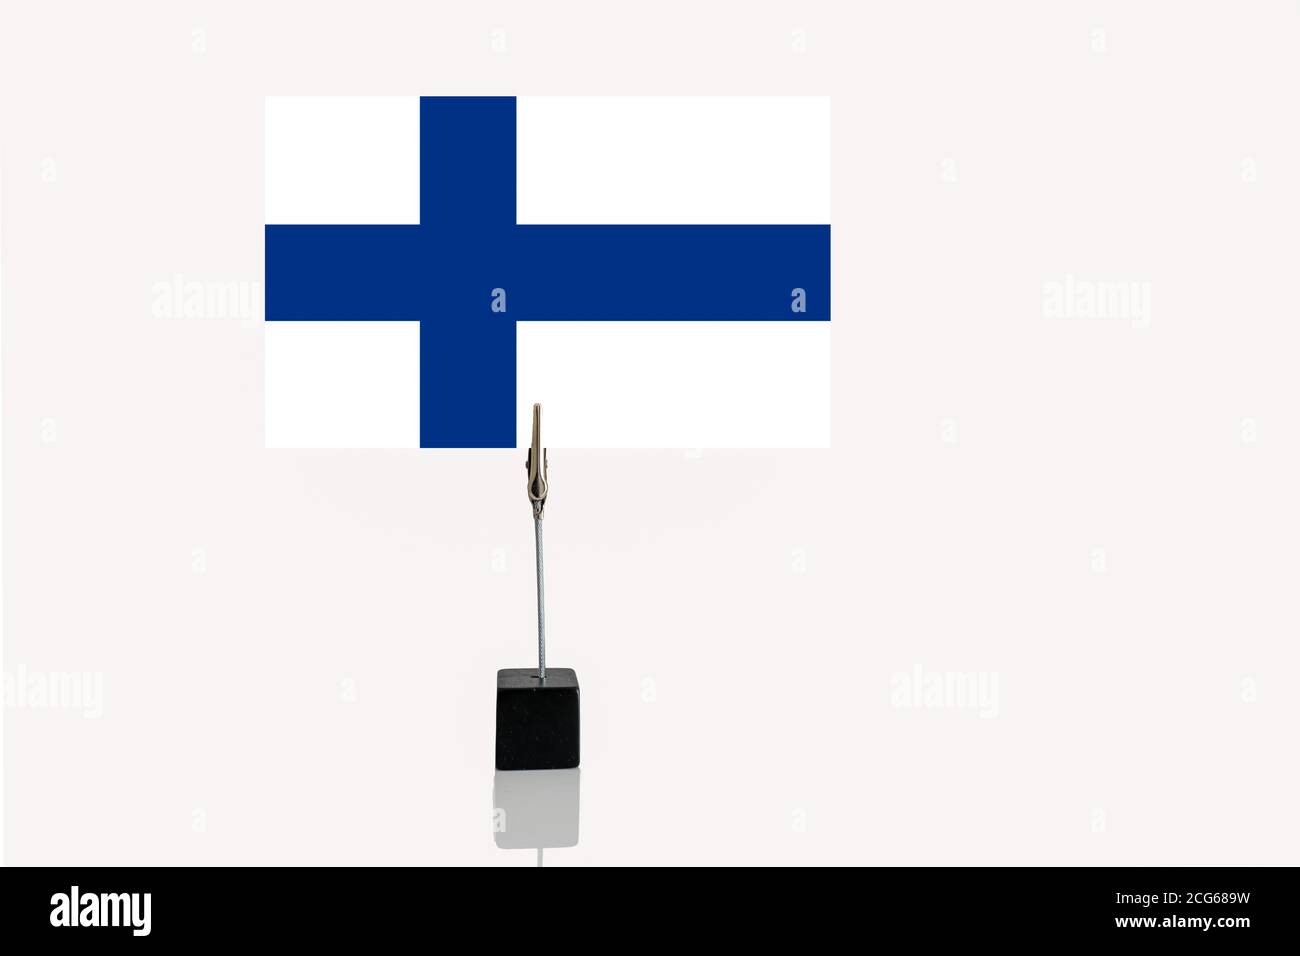 Democratic Republic of Finland miniature flag in cube base in photograph holder on a white background Stock Photo